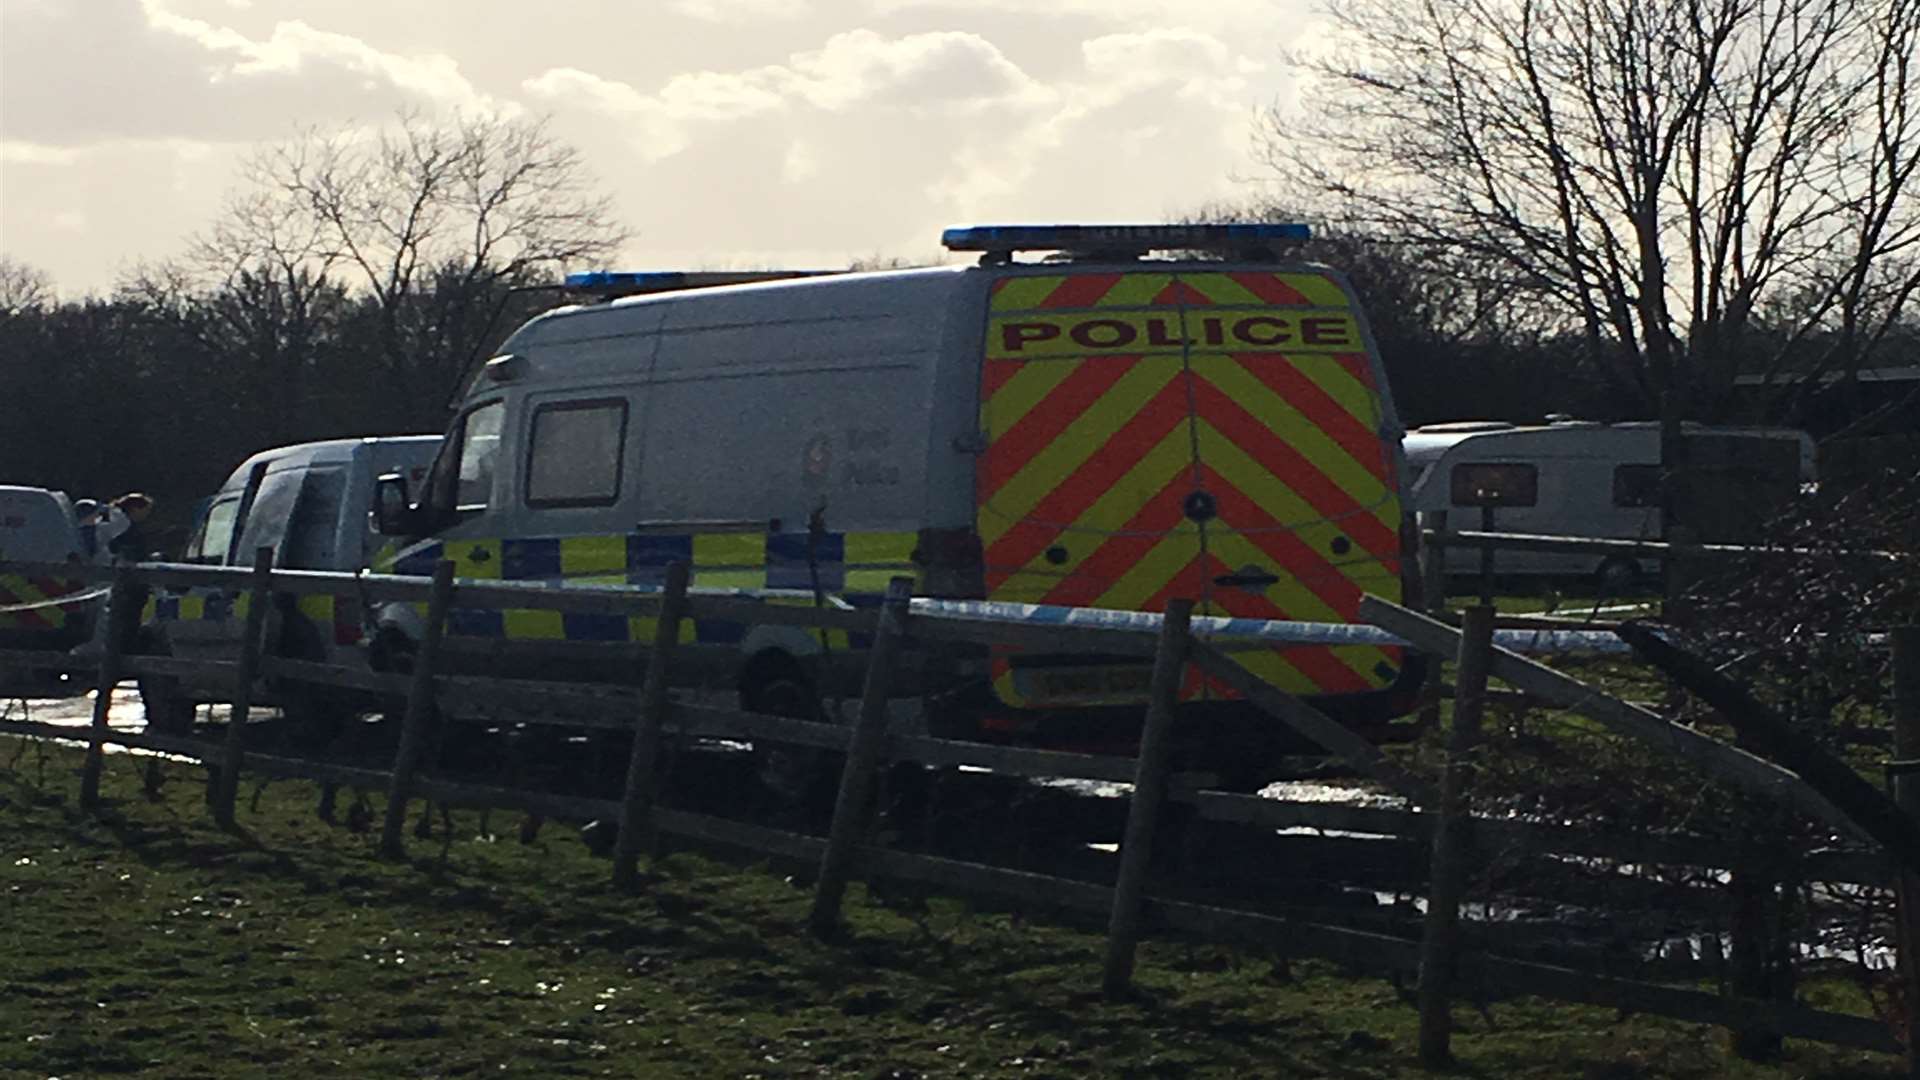 Police are at the scene of an attempted murder investigation in Yalding.